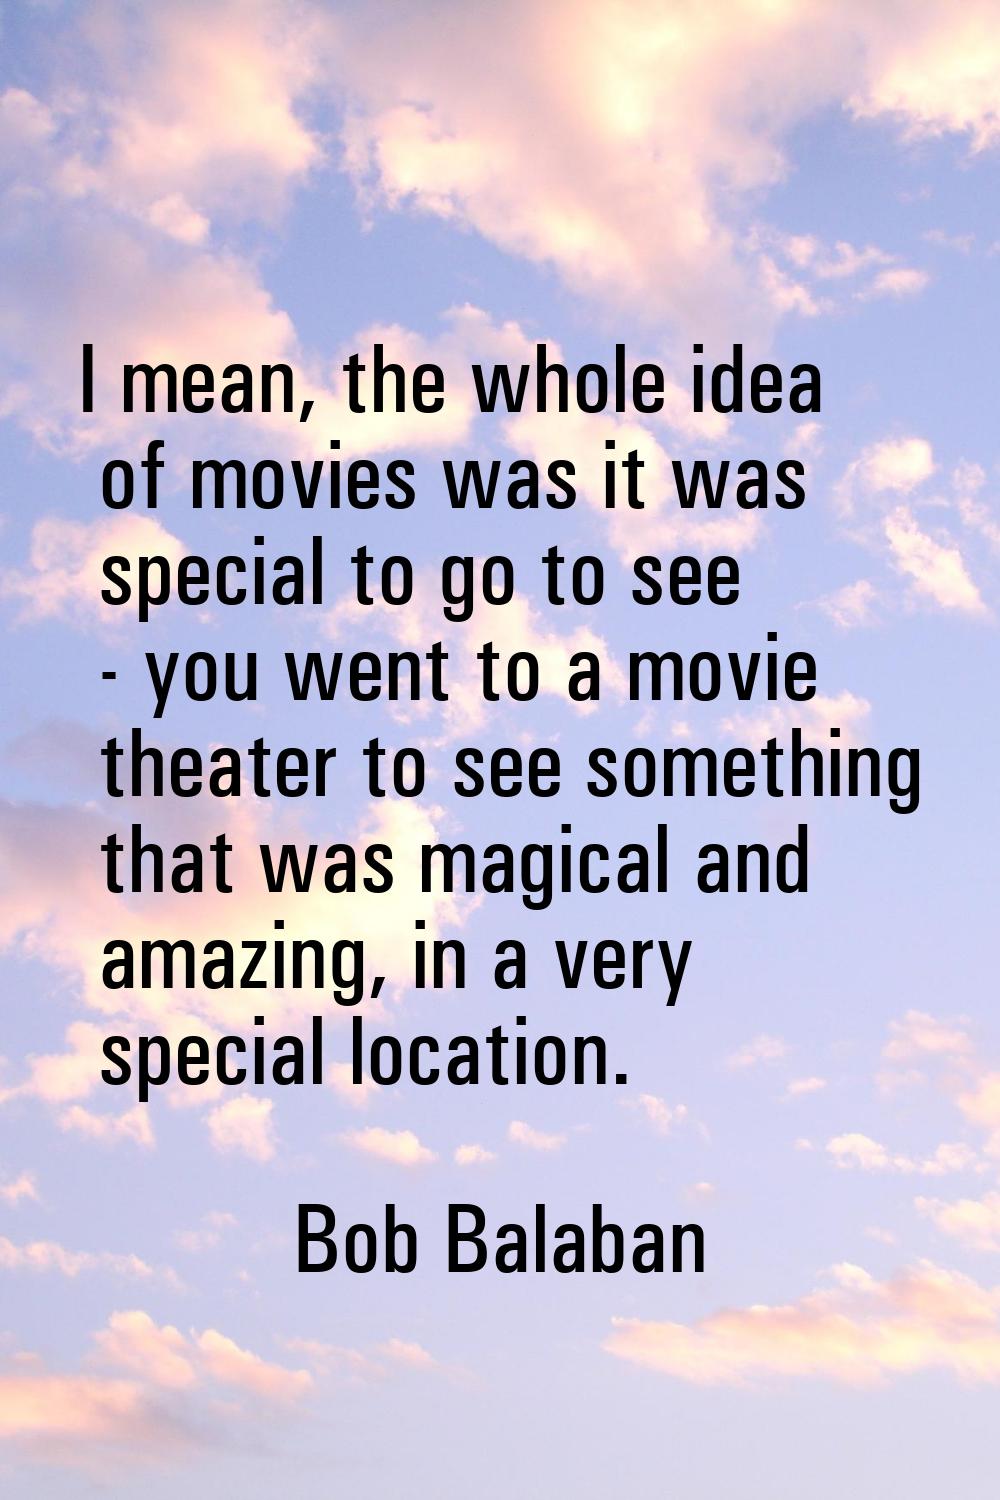 I mean, the whole idea of movies was it was special to go to see - you went to a movie theater to s